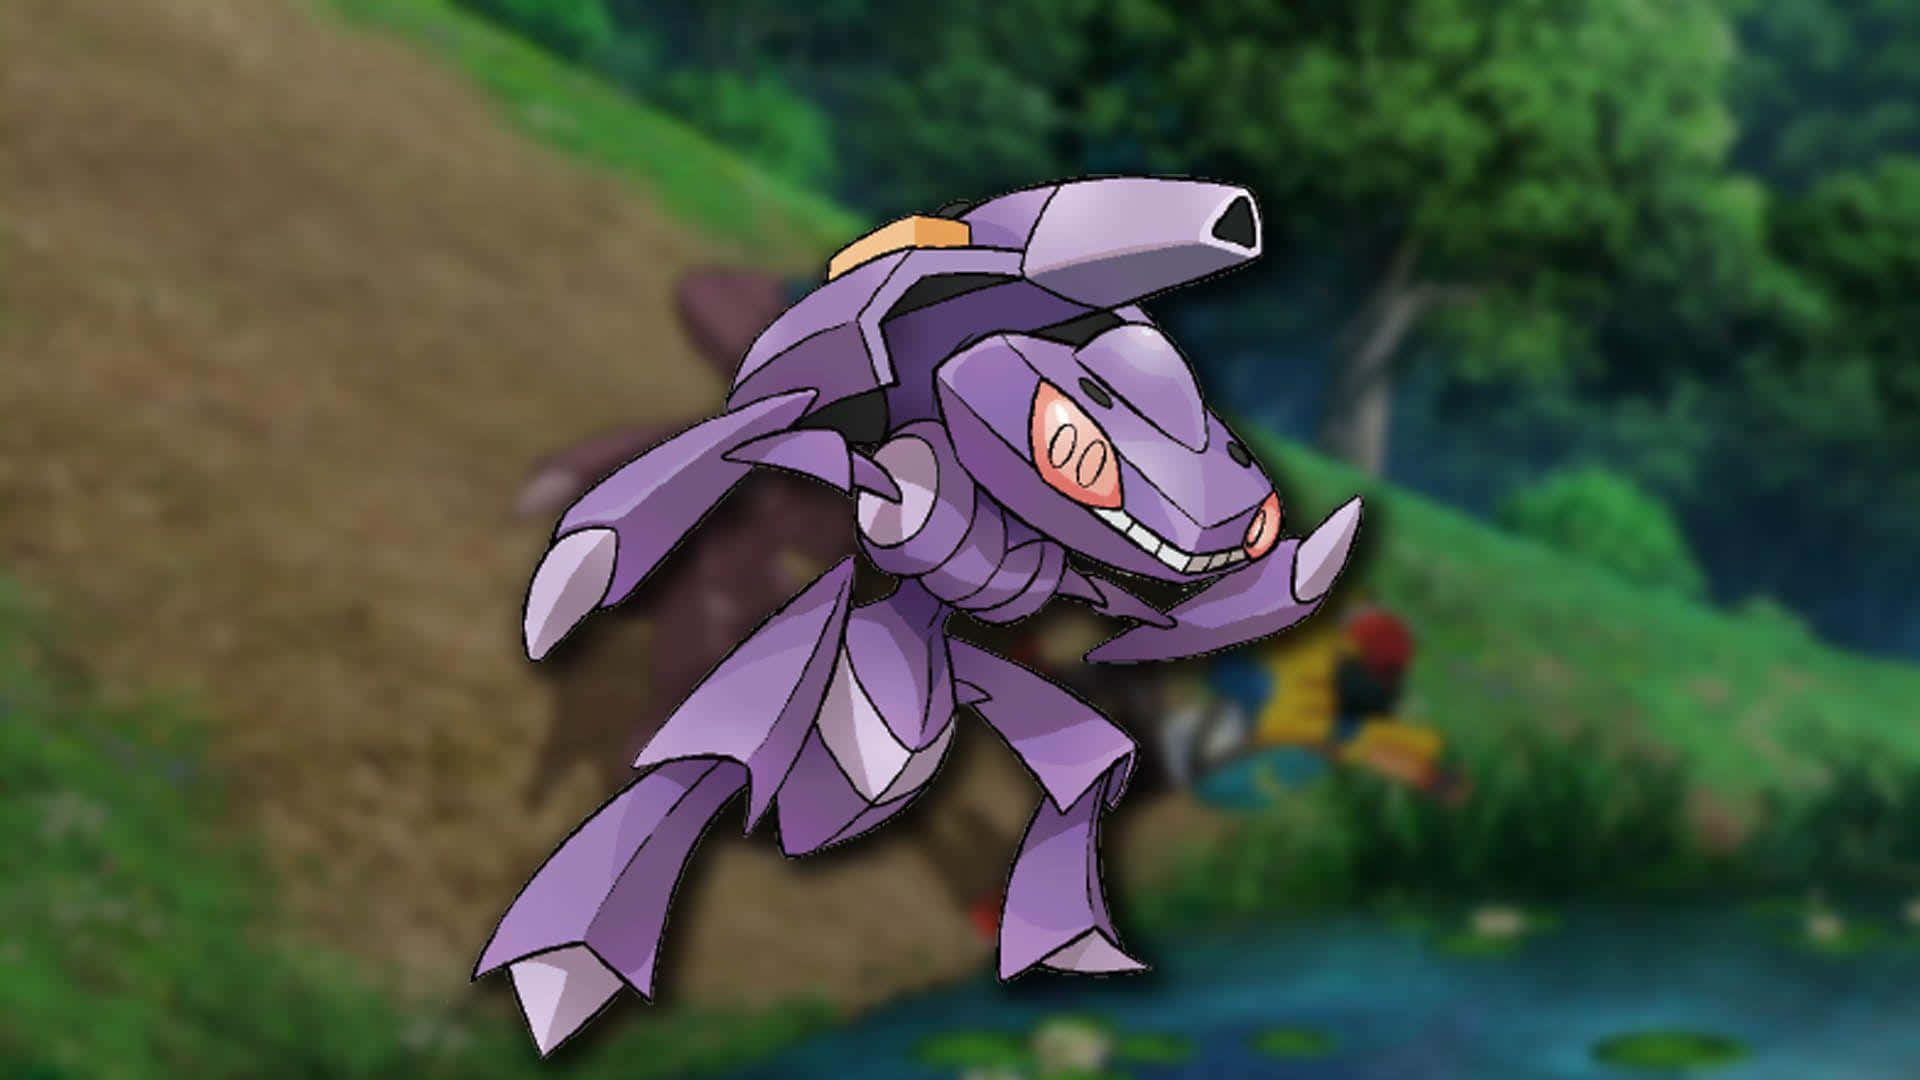 Genesect Pokemon With Nature Background Wallpaper